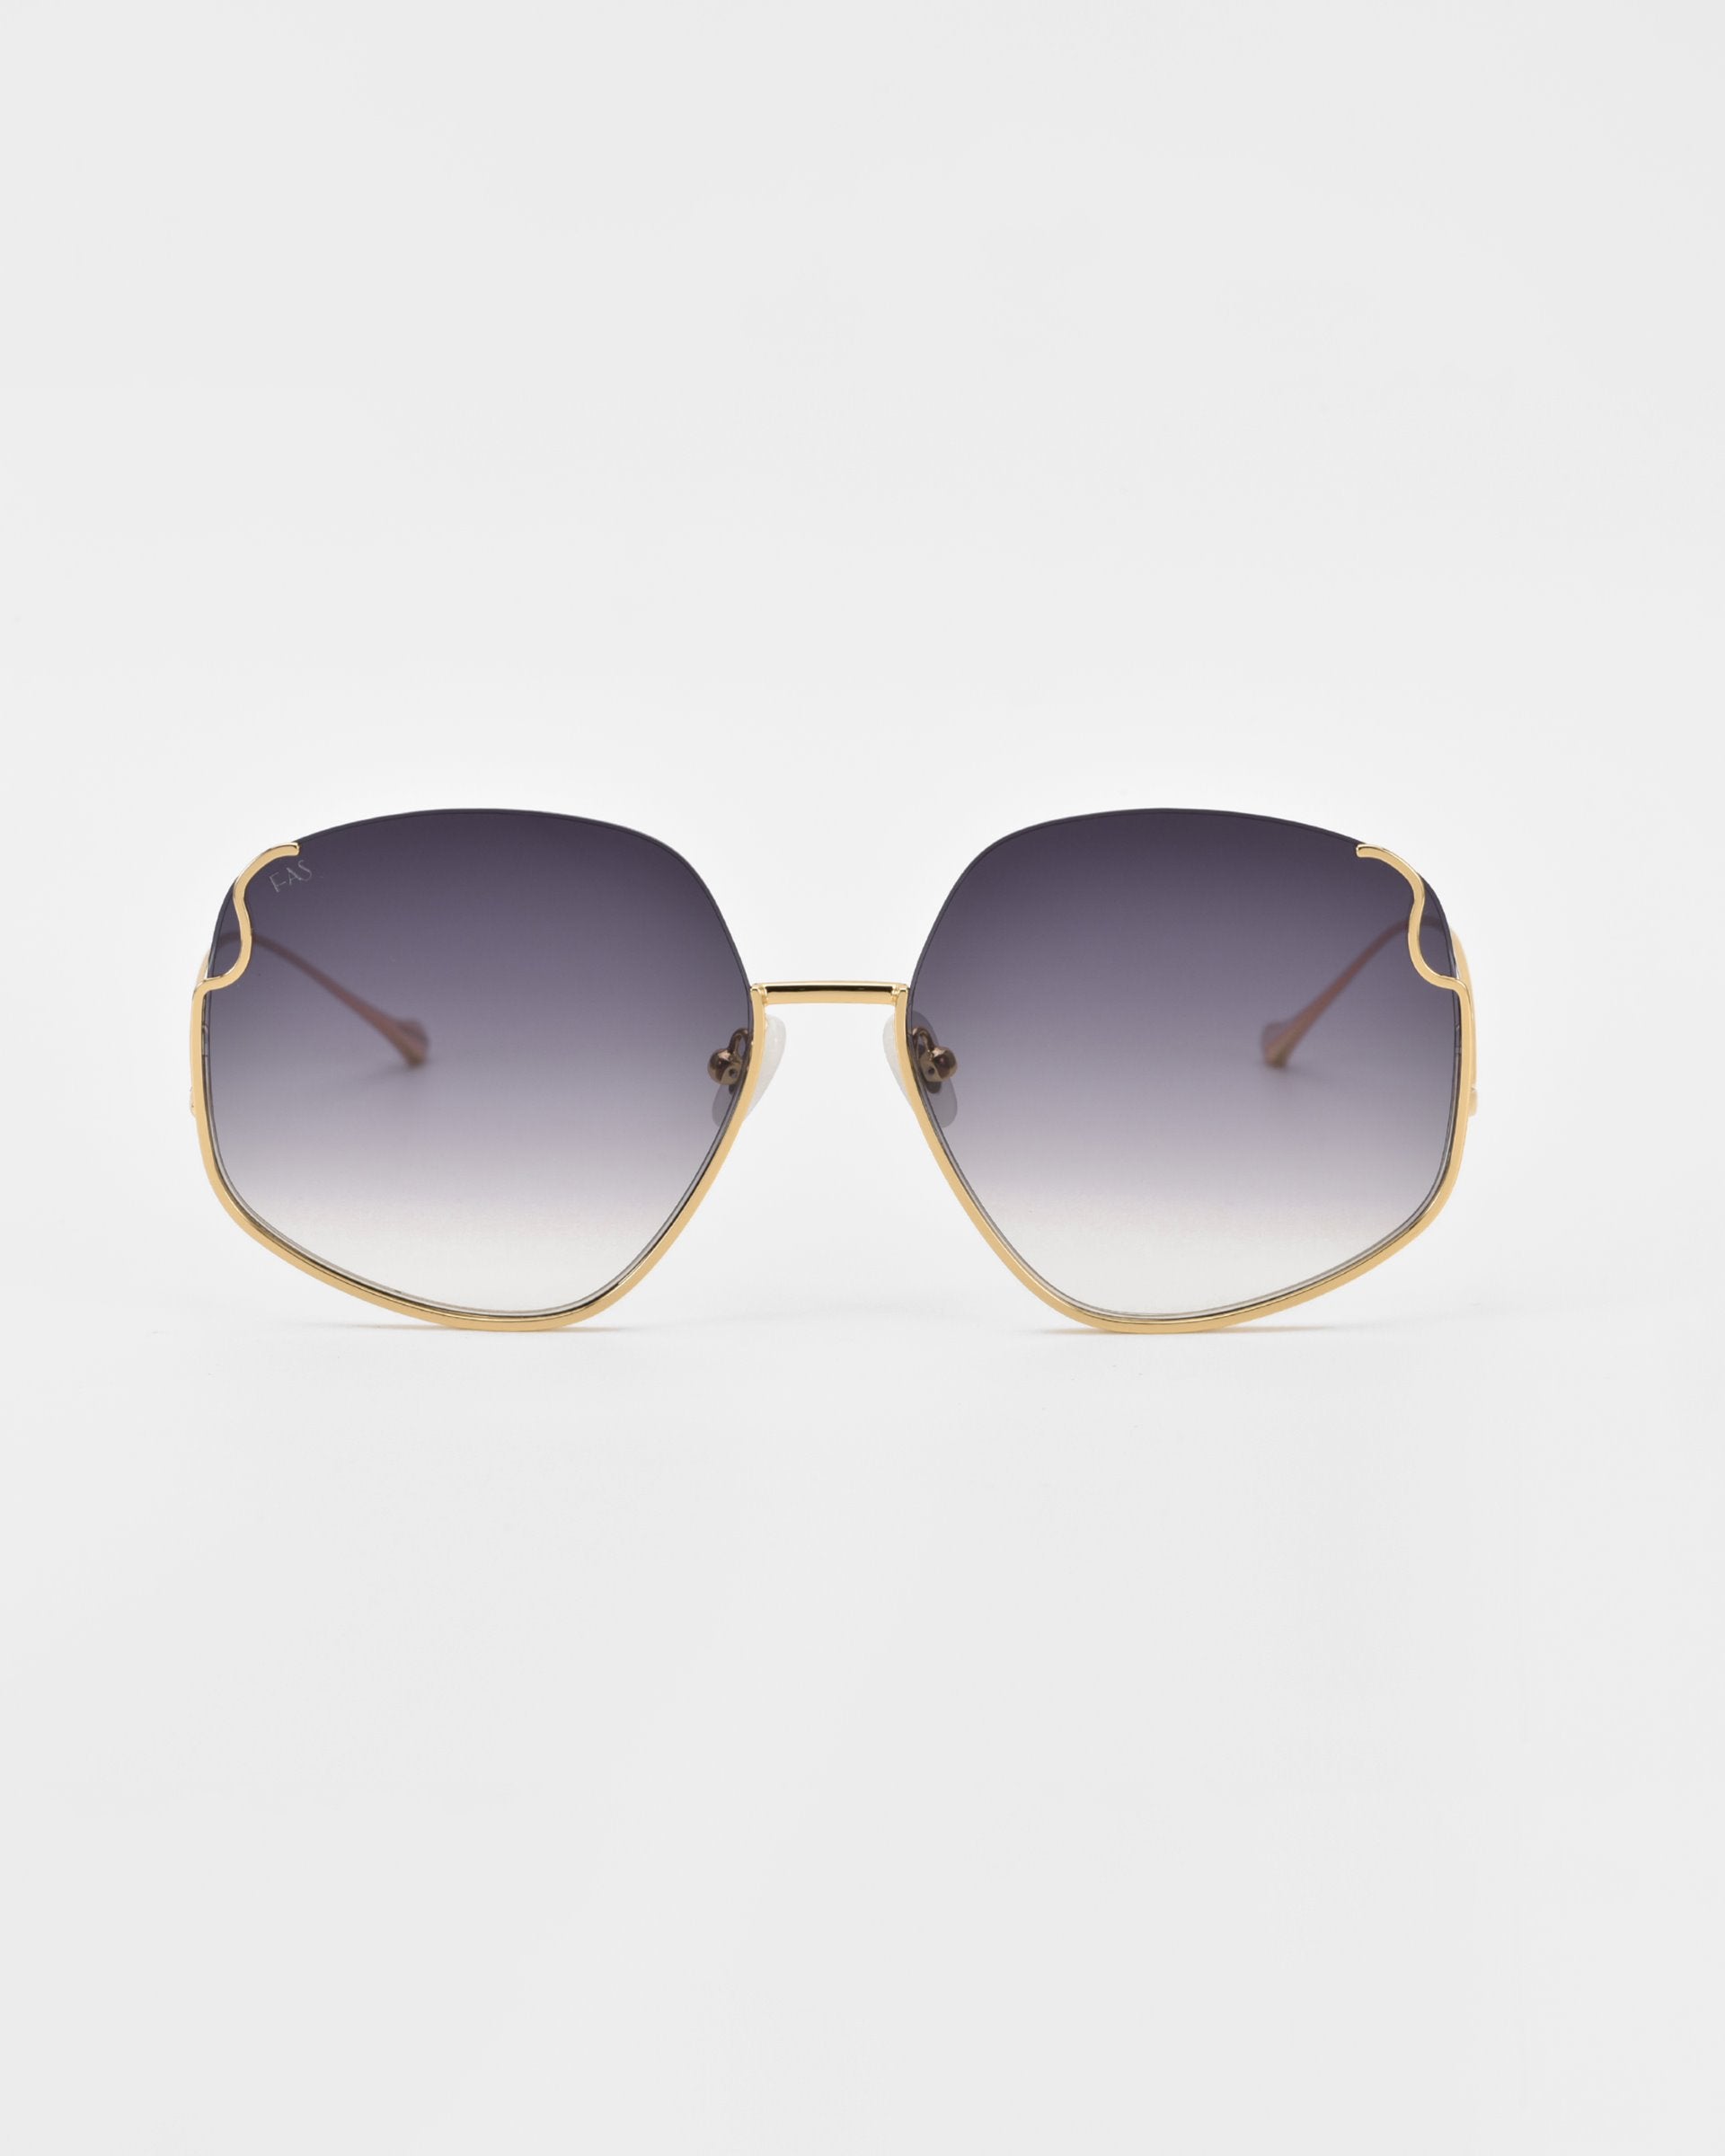 A pair of luxurious For Art&#39;s Sake® Drape sunglasses with gold frames and large, slightly hexagonal lenses. The lenses have a gradient tint, transitioning from dark at the top to lighter at the bottom. The frame features intricate metal detailing on thin arms and a minimalistic design. The background is plain white.